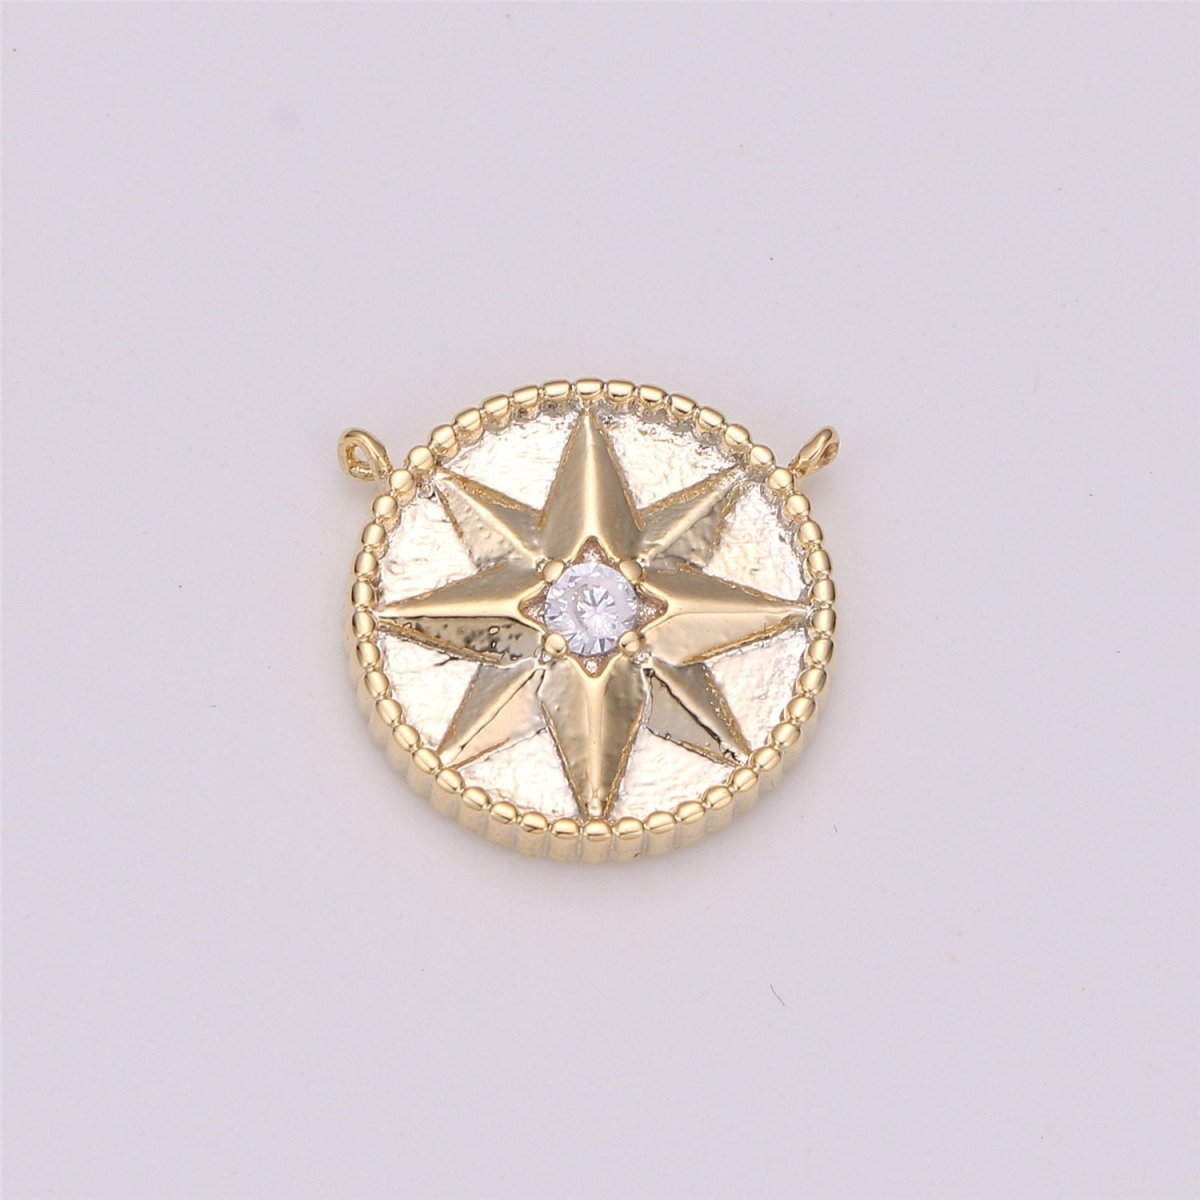 18k Gold Filled Star Coin Charm Celestial North Star Coin Pendant Tiny Small 12mm CZ Drop Charm Minimalist Jewelry Double Bail Pendant F-287 - DLUXCA